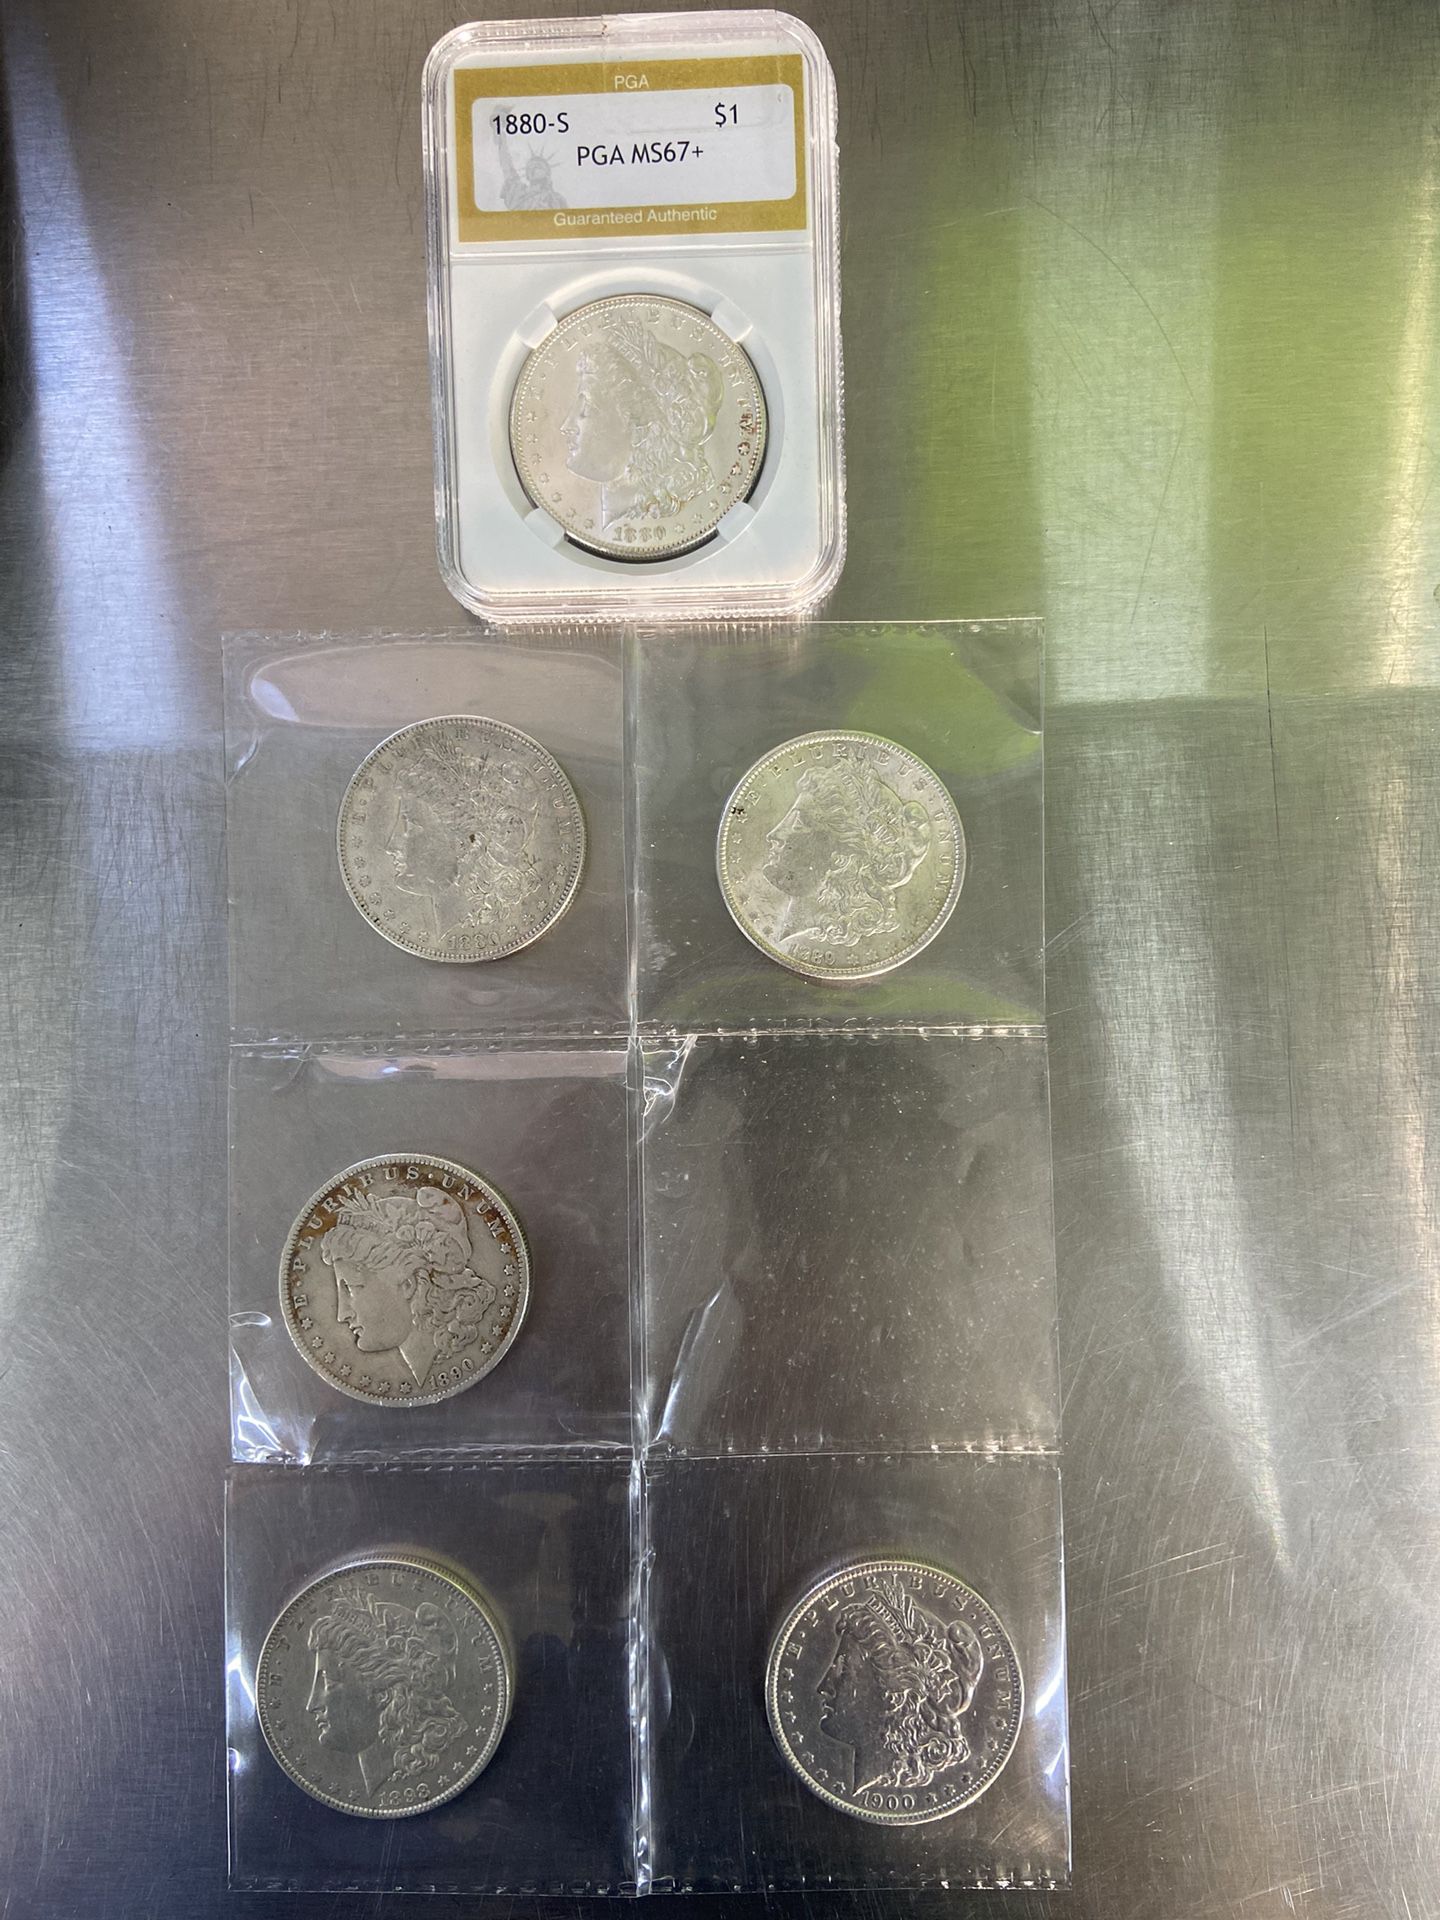 6 Morgan Dollars 1 Certified MS67+ for PGA And 5 Not Certified $1000 OBO